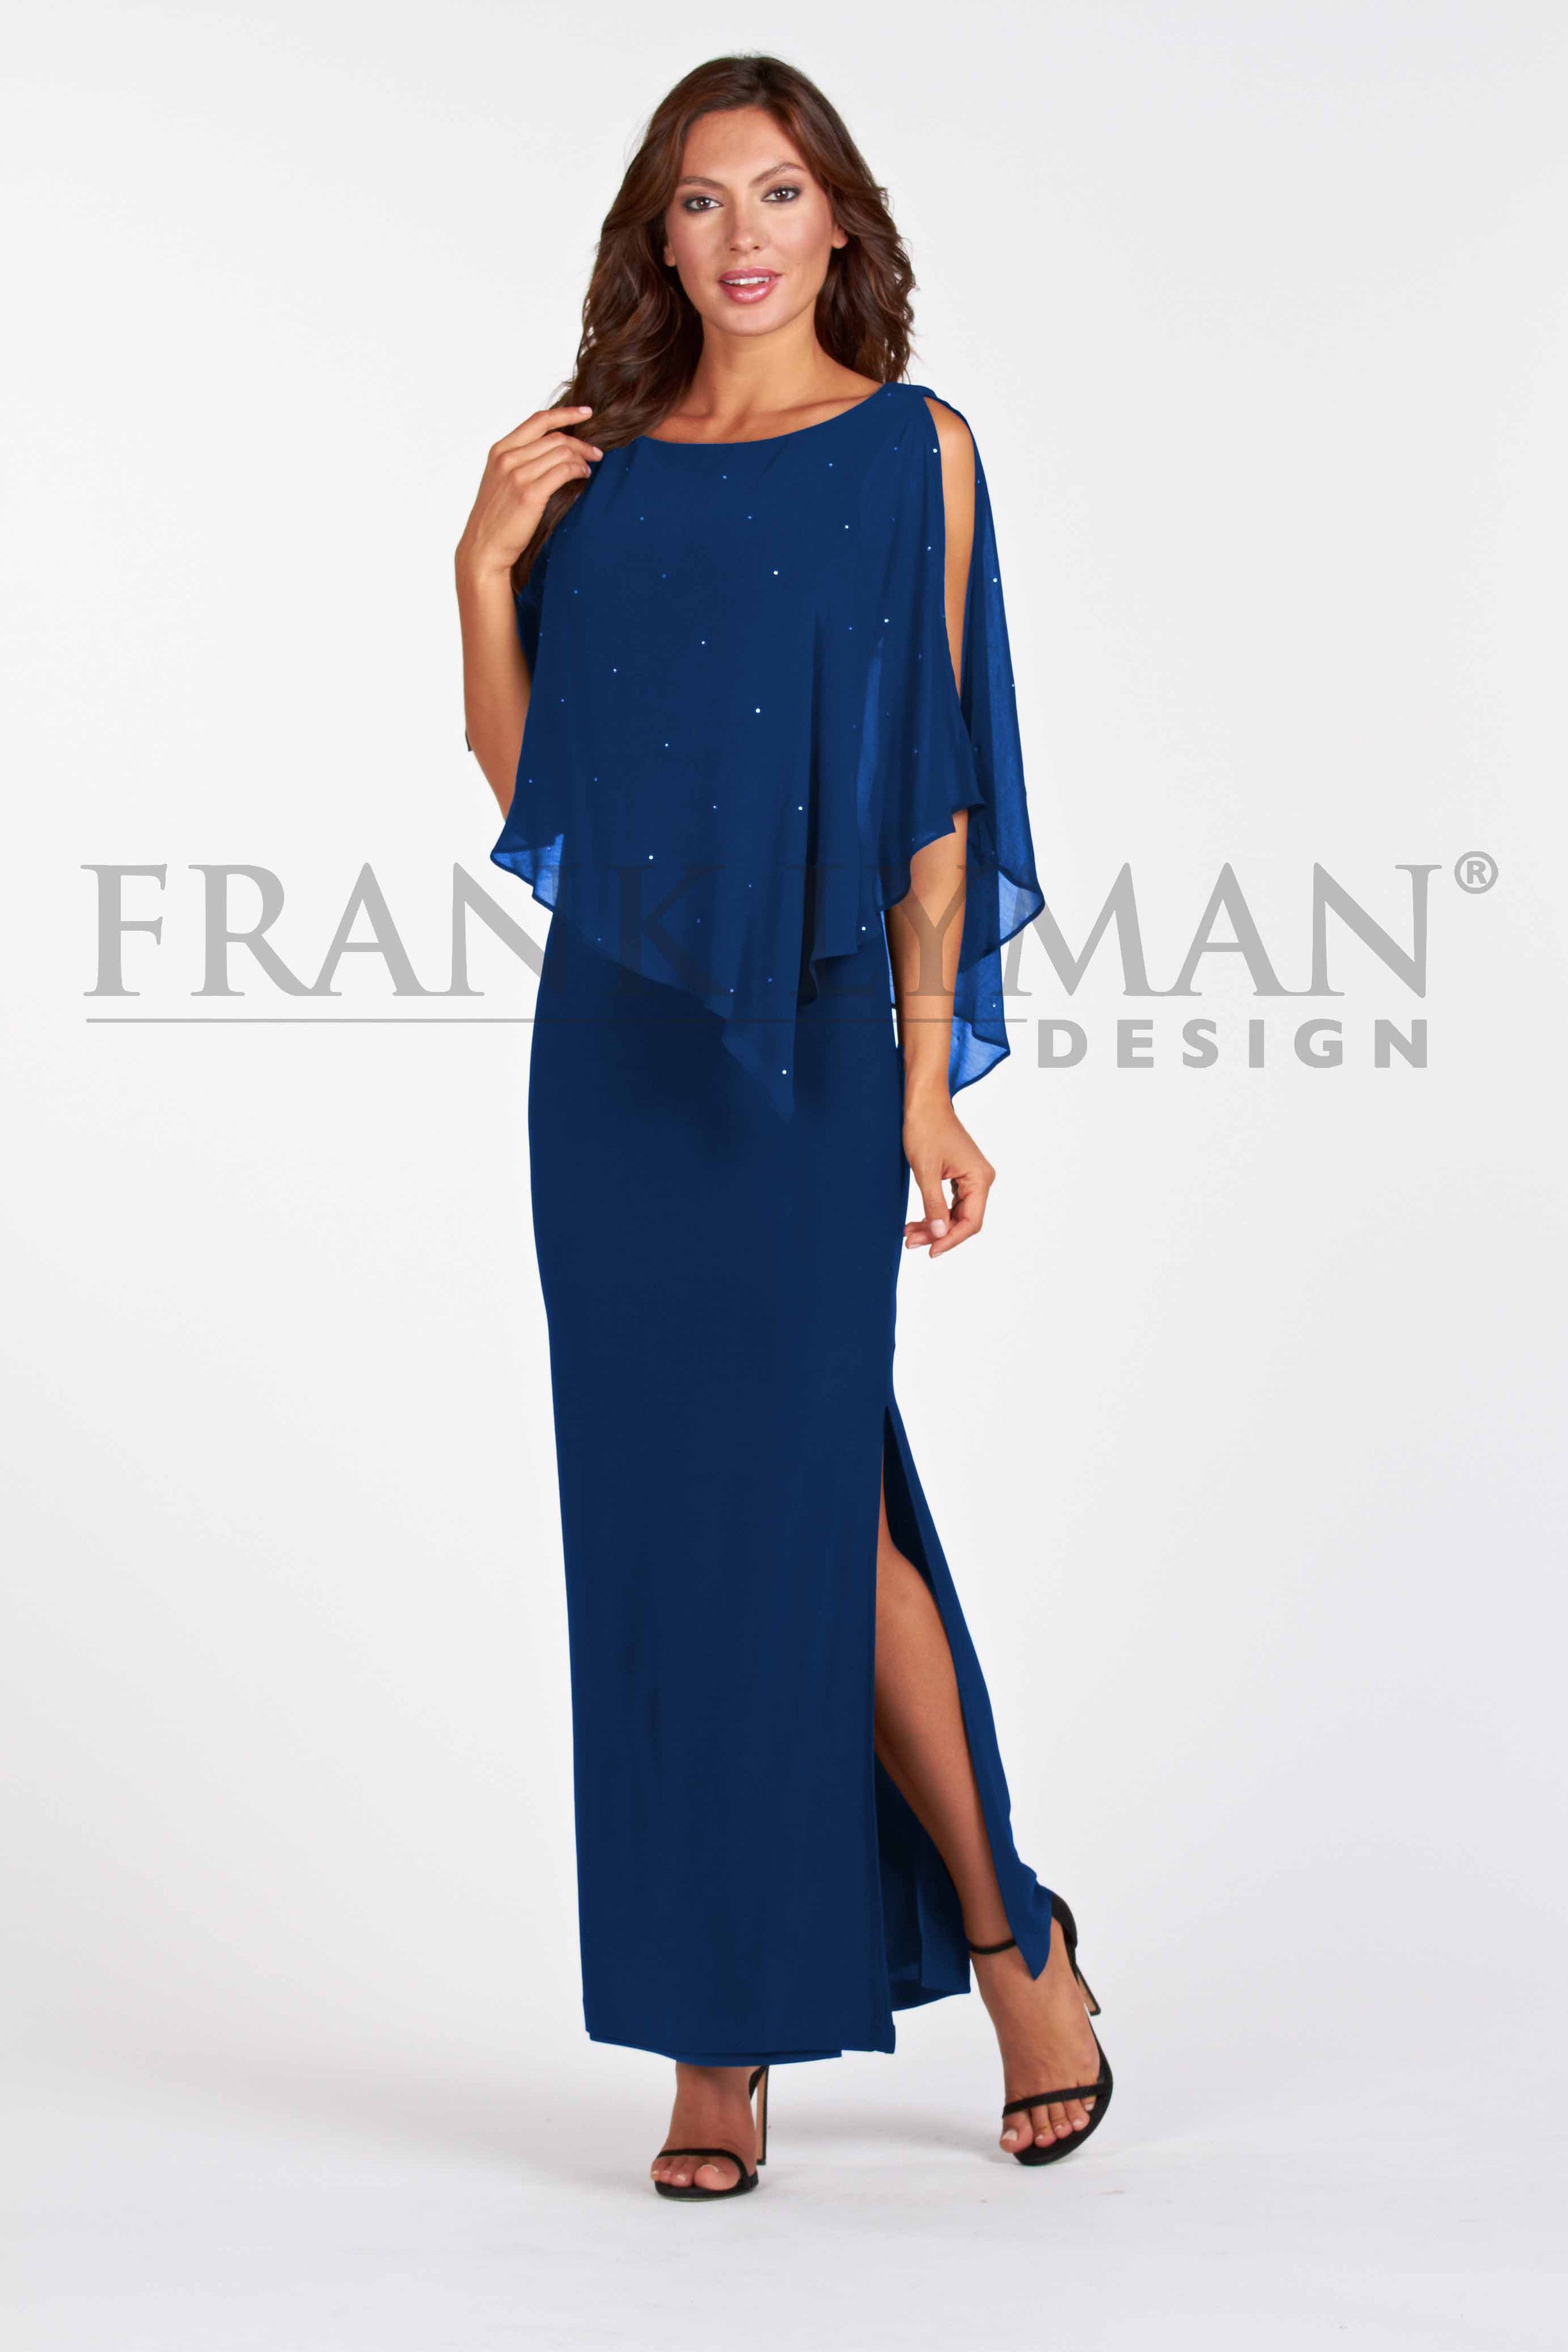 68004 (Navy/Ultra blue/tomato Evening Gown)